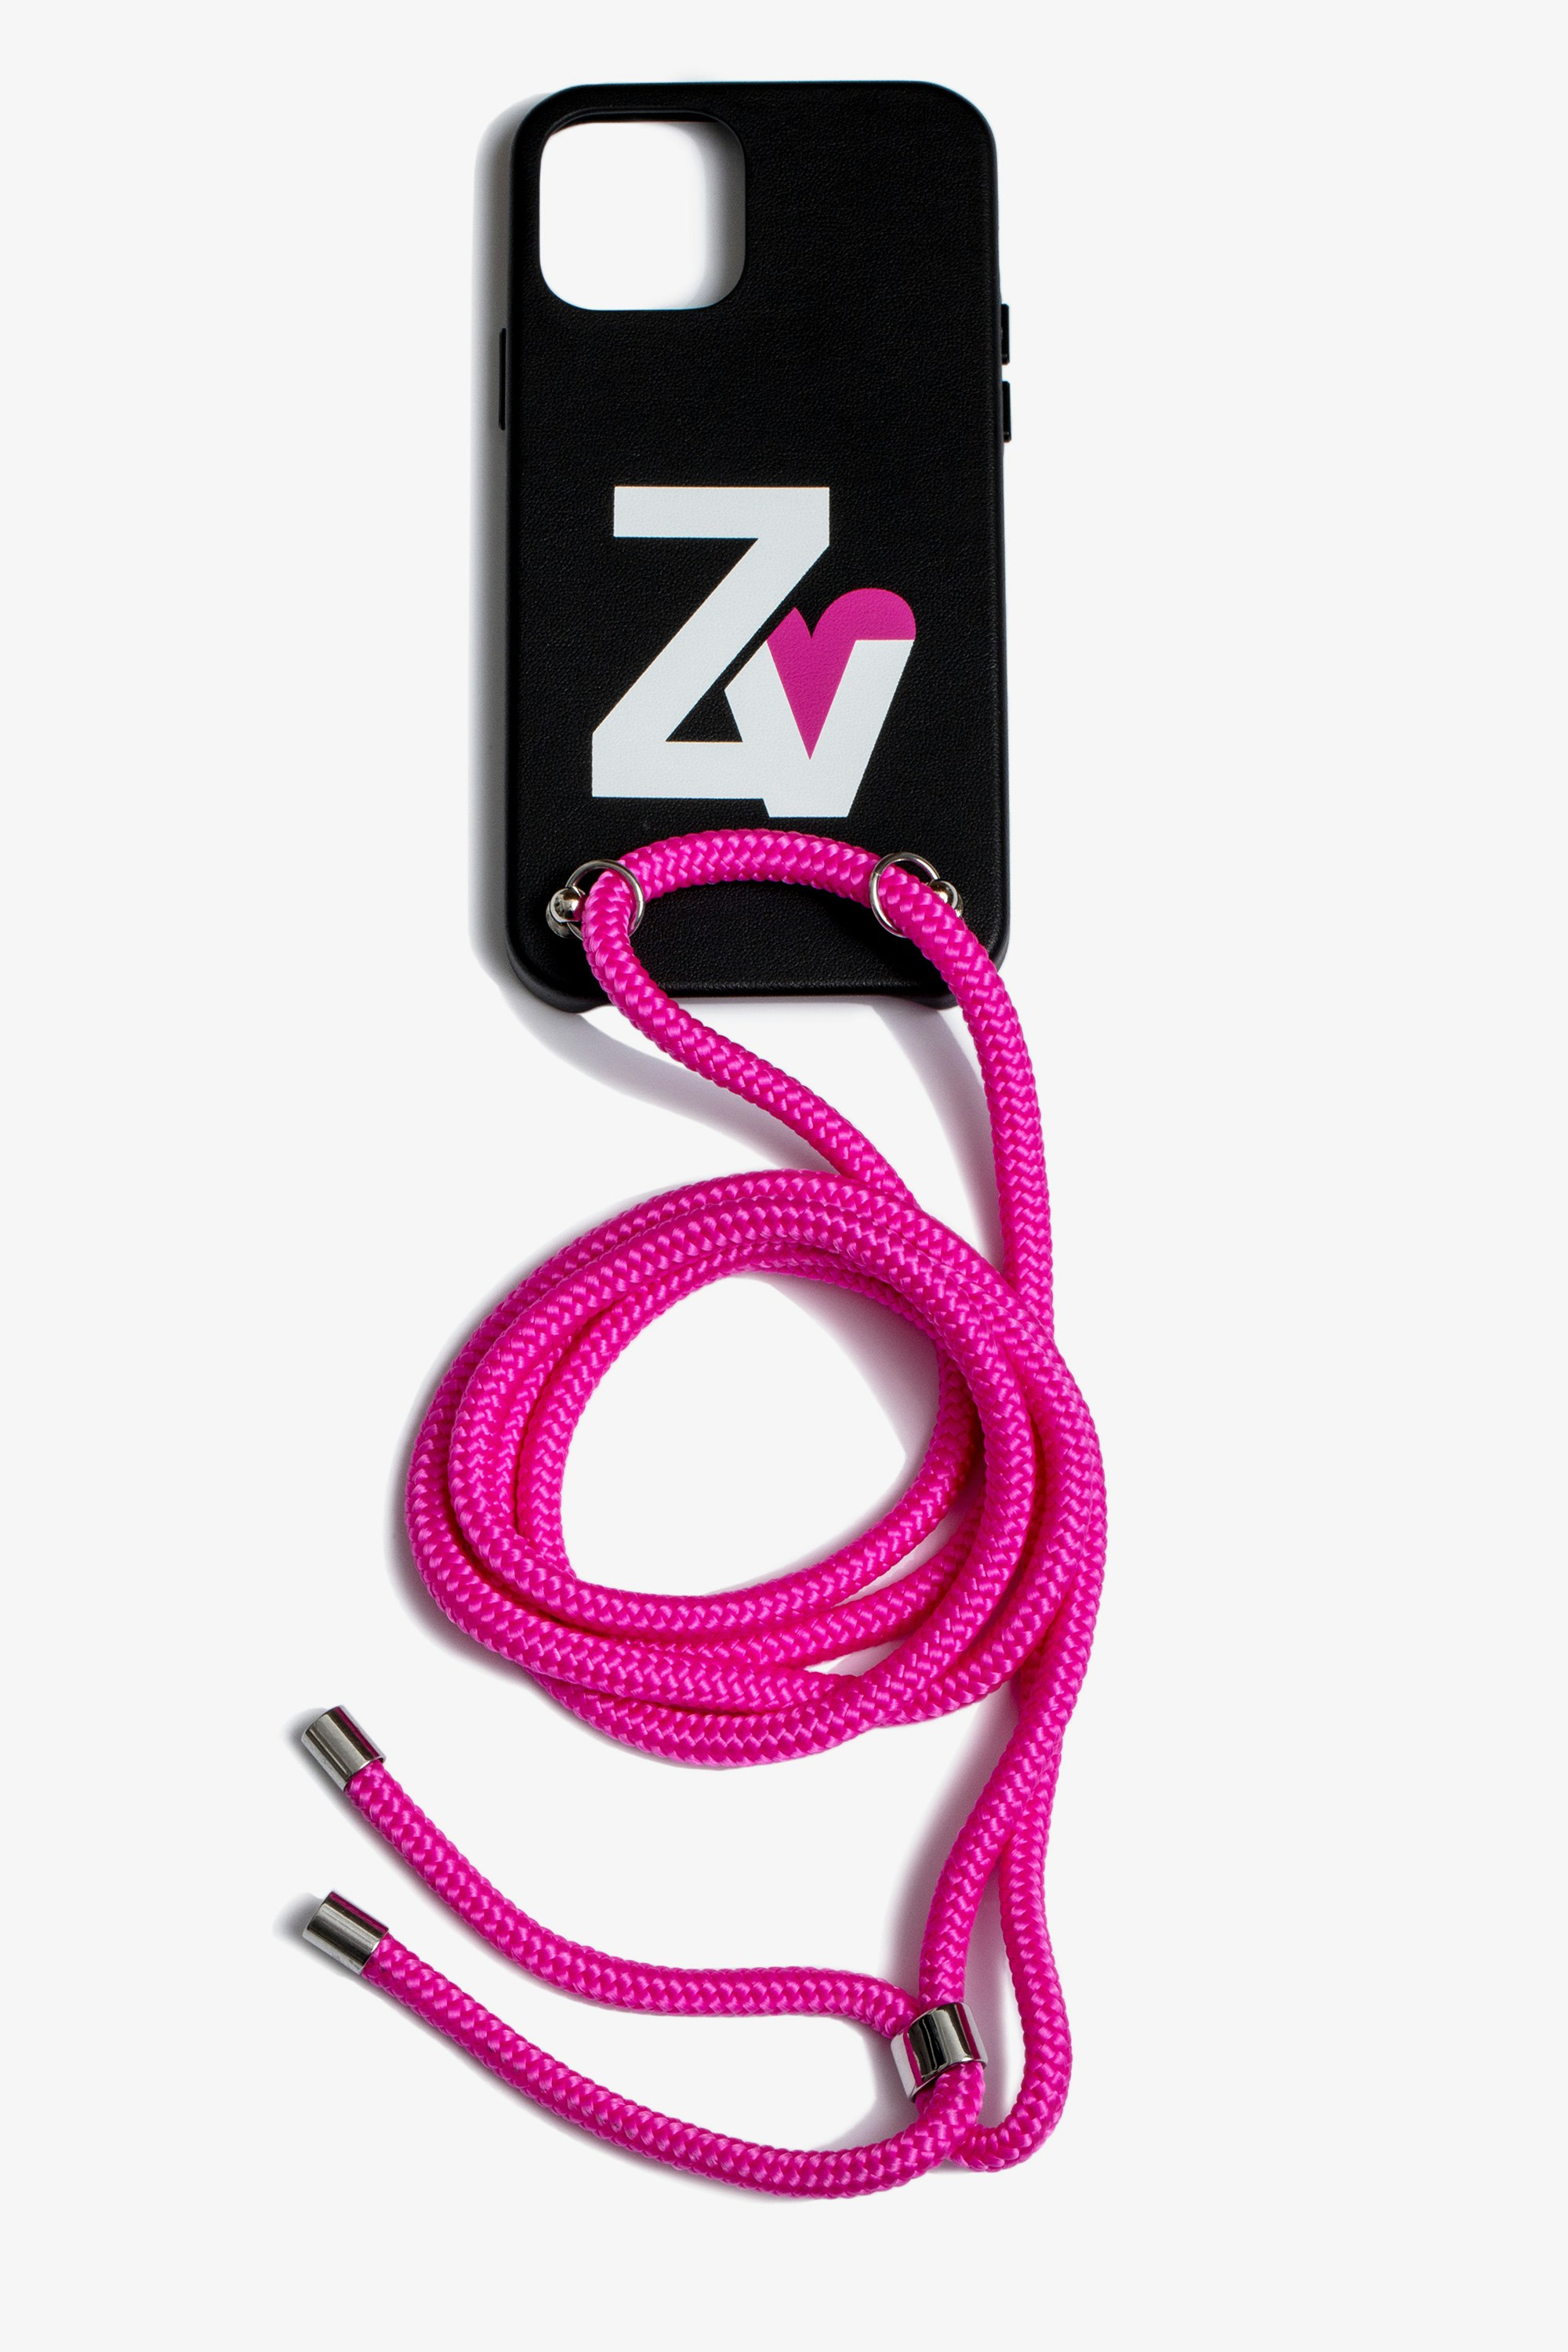 ZV Crush Rope iPhone 12 Cover Women’s iPhone 12 cover with ZV Crush logo on the back and a cord to wear around your neck